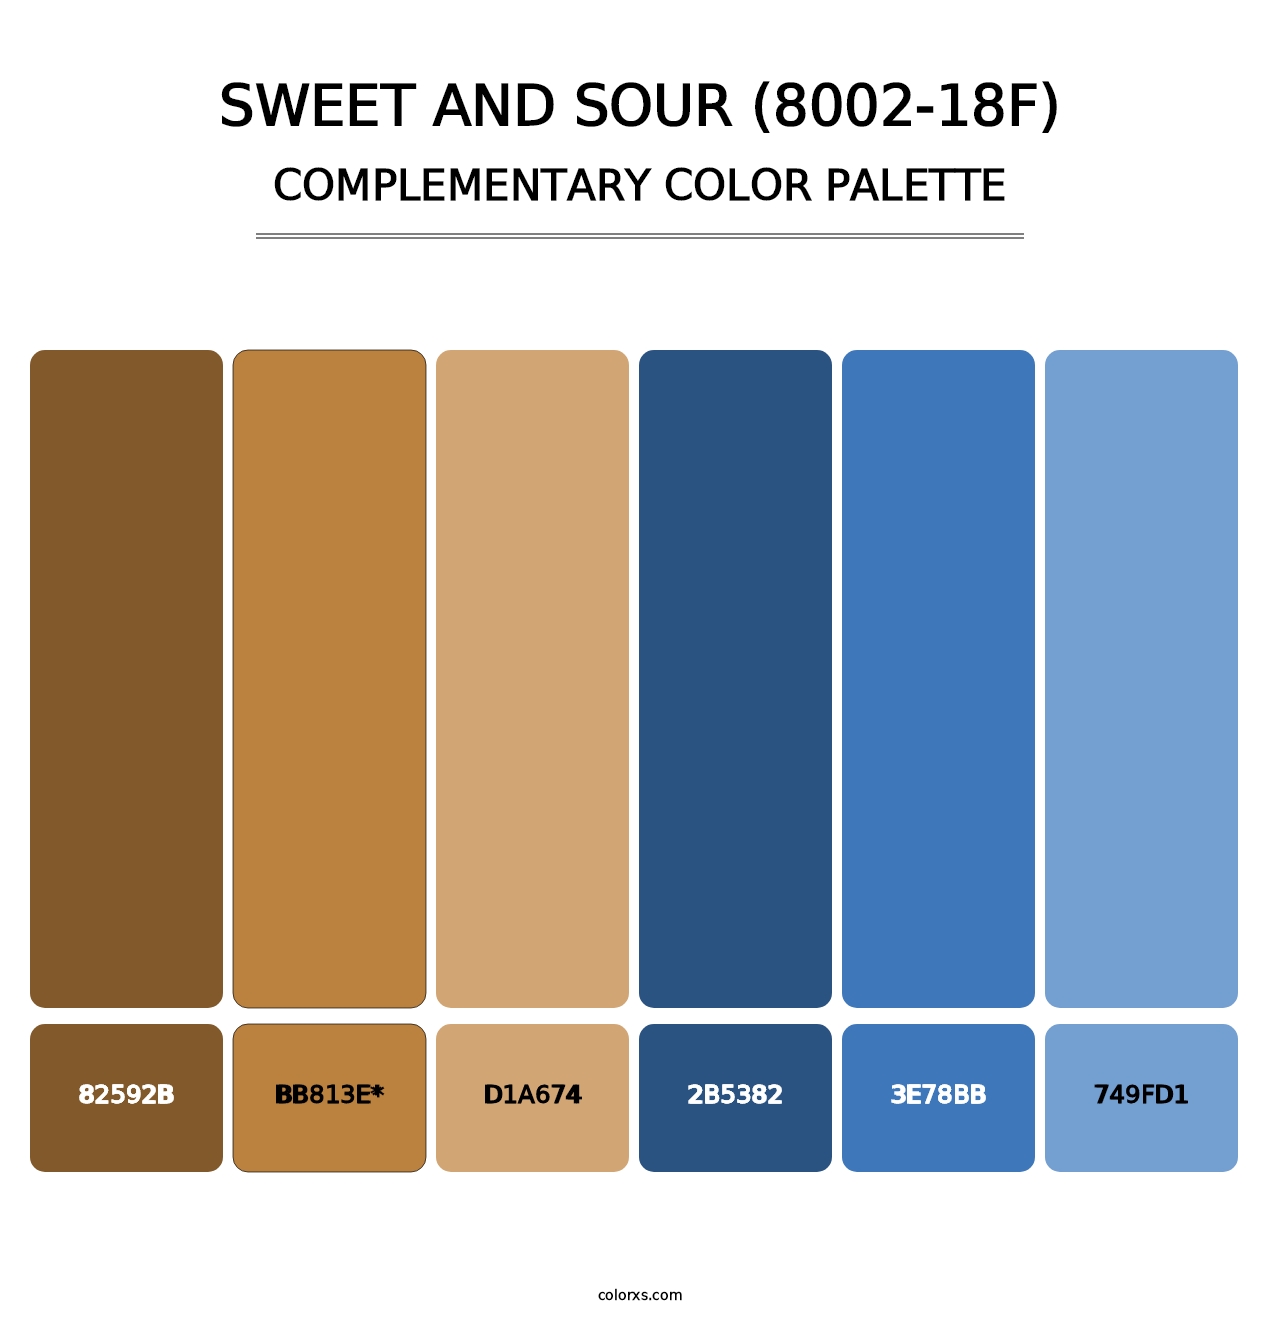 Sweet and Sour (8002-18F) - Complementary Color Palette